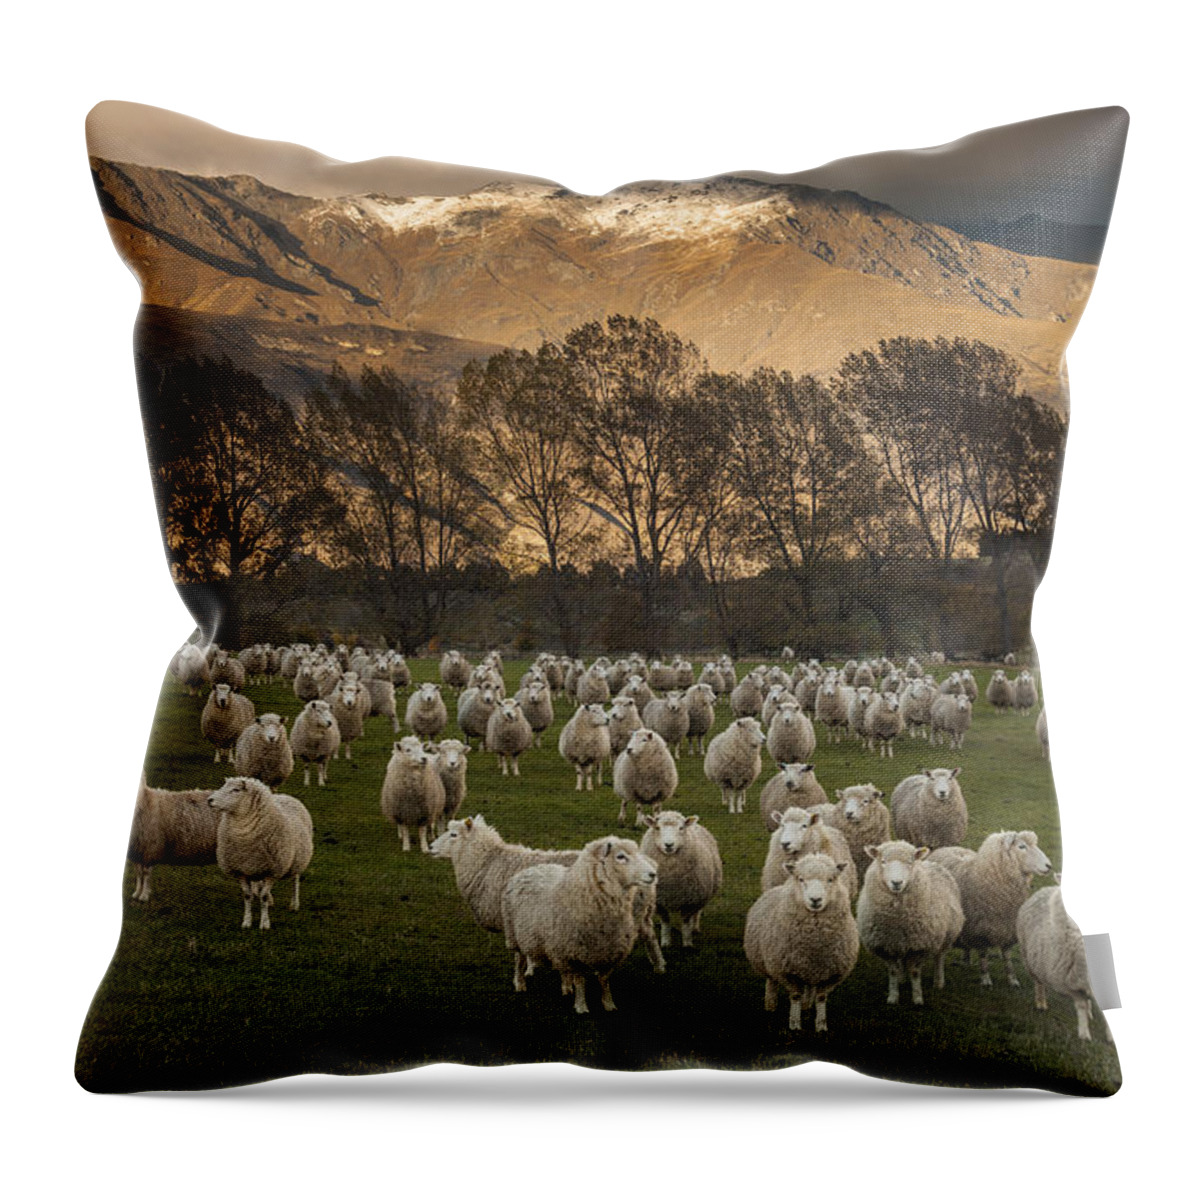 colin Monteath Hedgehog House Throw Pillow featuring the photograph Sheep Flock At Dawn Arrowtown Otago New by Colin Monteath, Hedgehog House